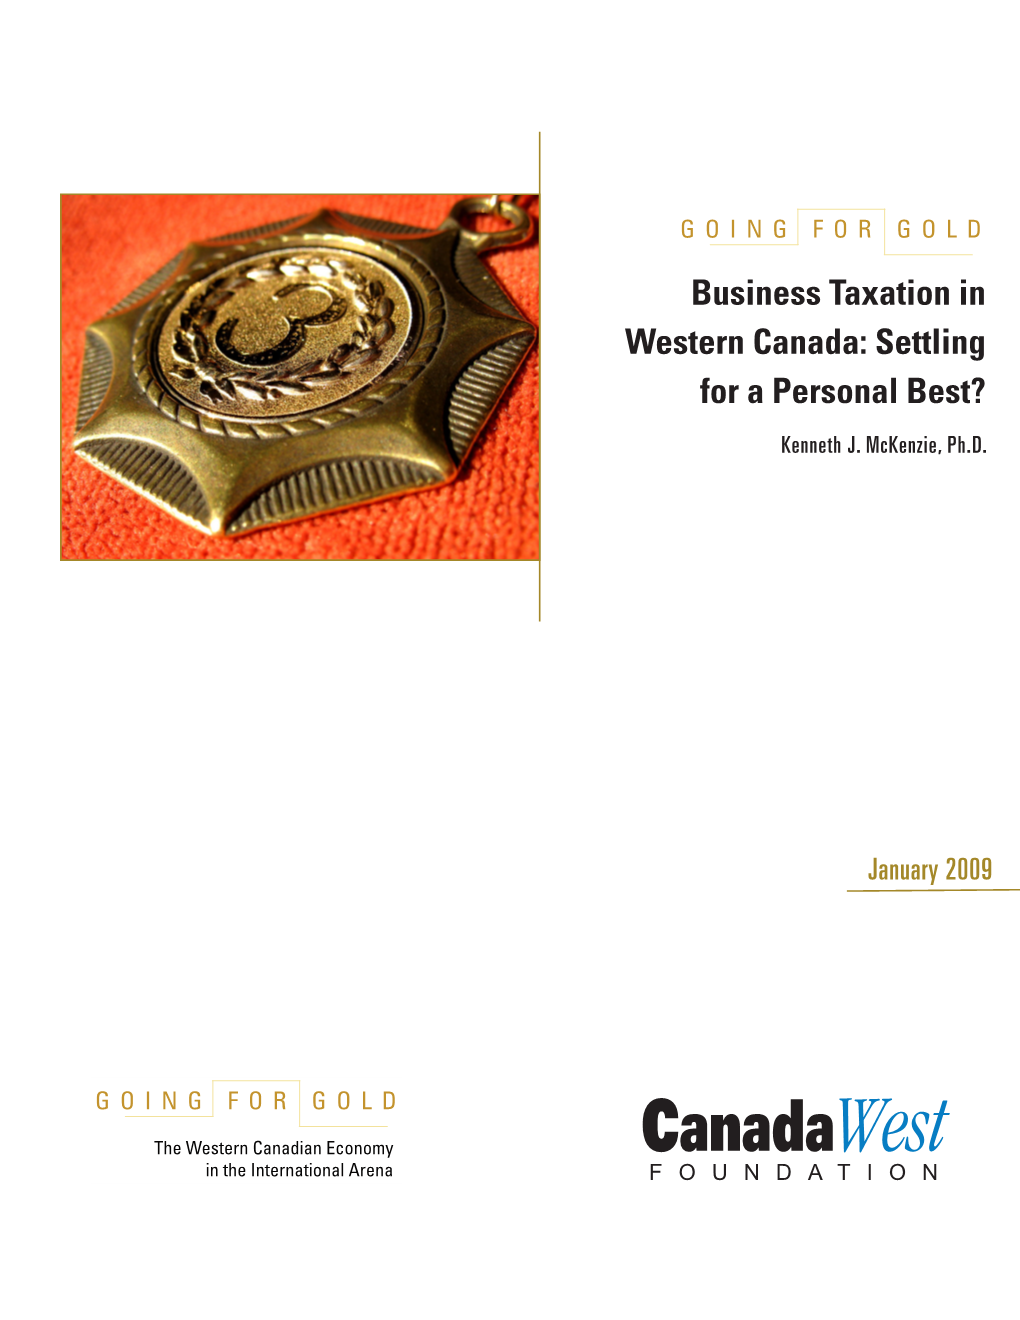 Canadawest in the International Arena FOUNDAT ION GOING for GOLD Western Canada’S Economic Prosperity Is Not Only Good for the West, but for Canada As a Whole